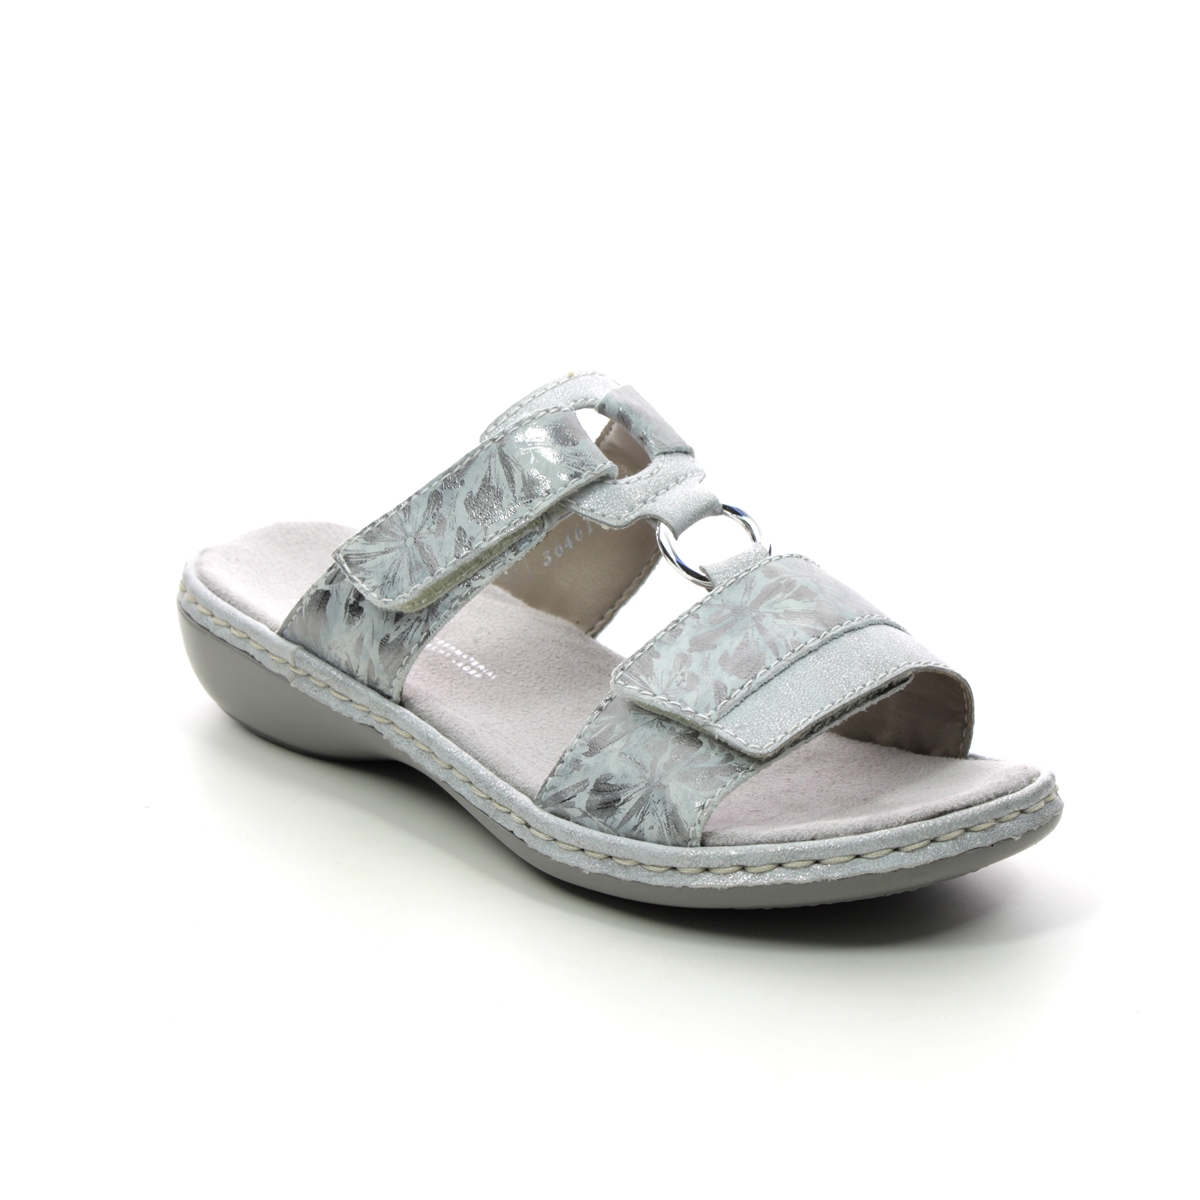 Rieker 659X6-80 Silver Glitz Womens Slide Sandals in a Plain Leather and Man-made in Size 41